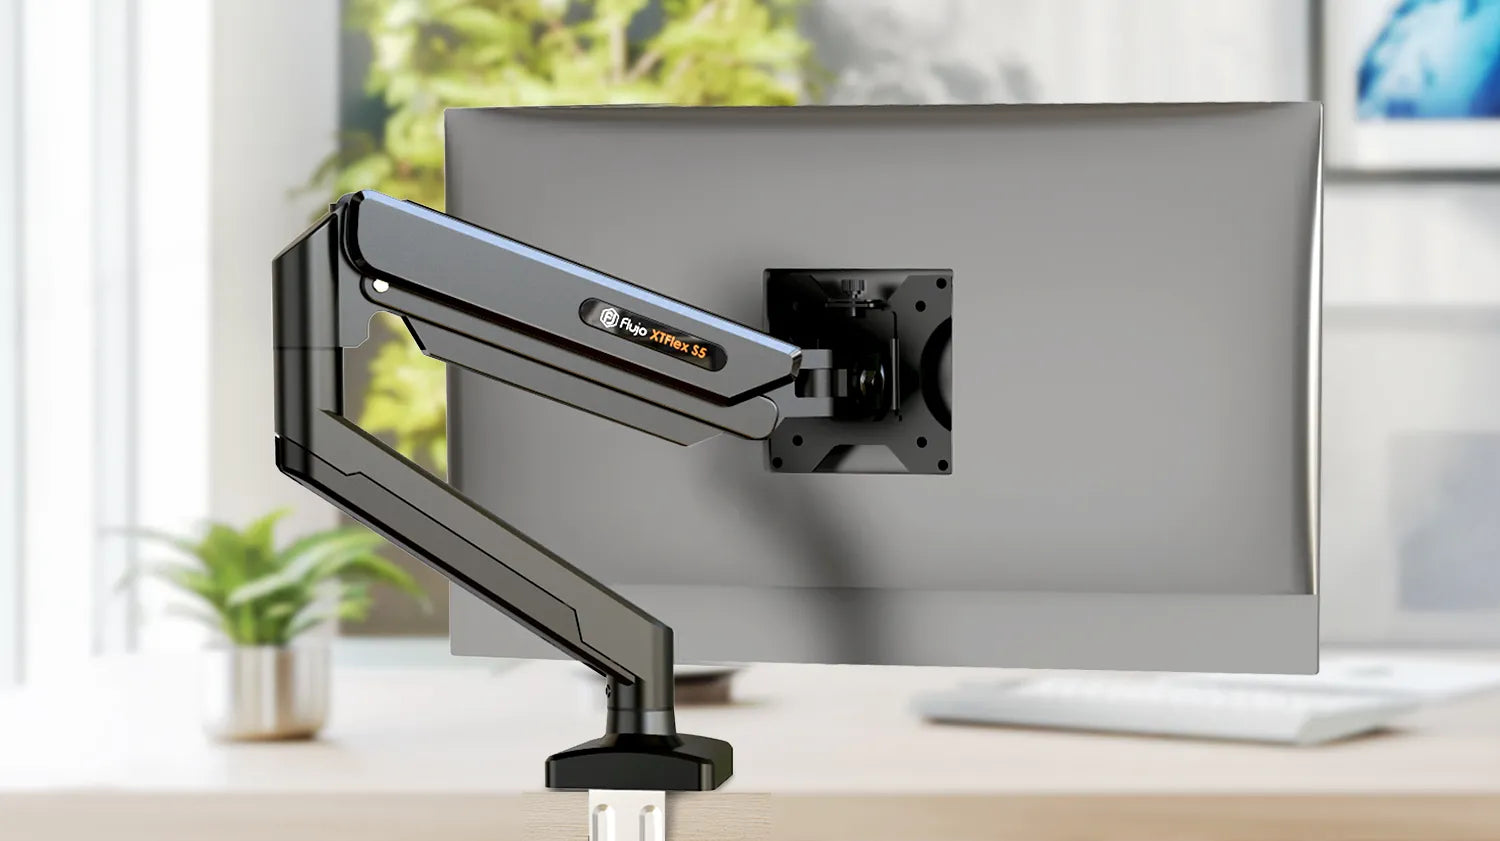 Flujo XTriFlex S5 monitor arm mounted on desk with clear workspace view.